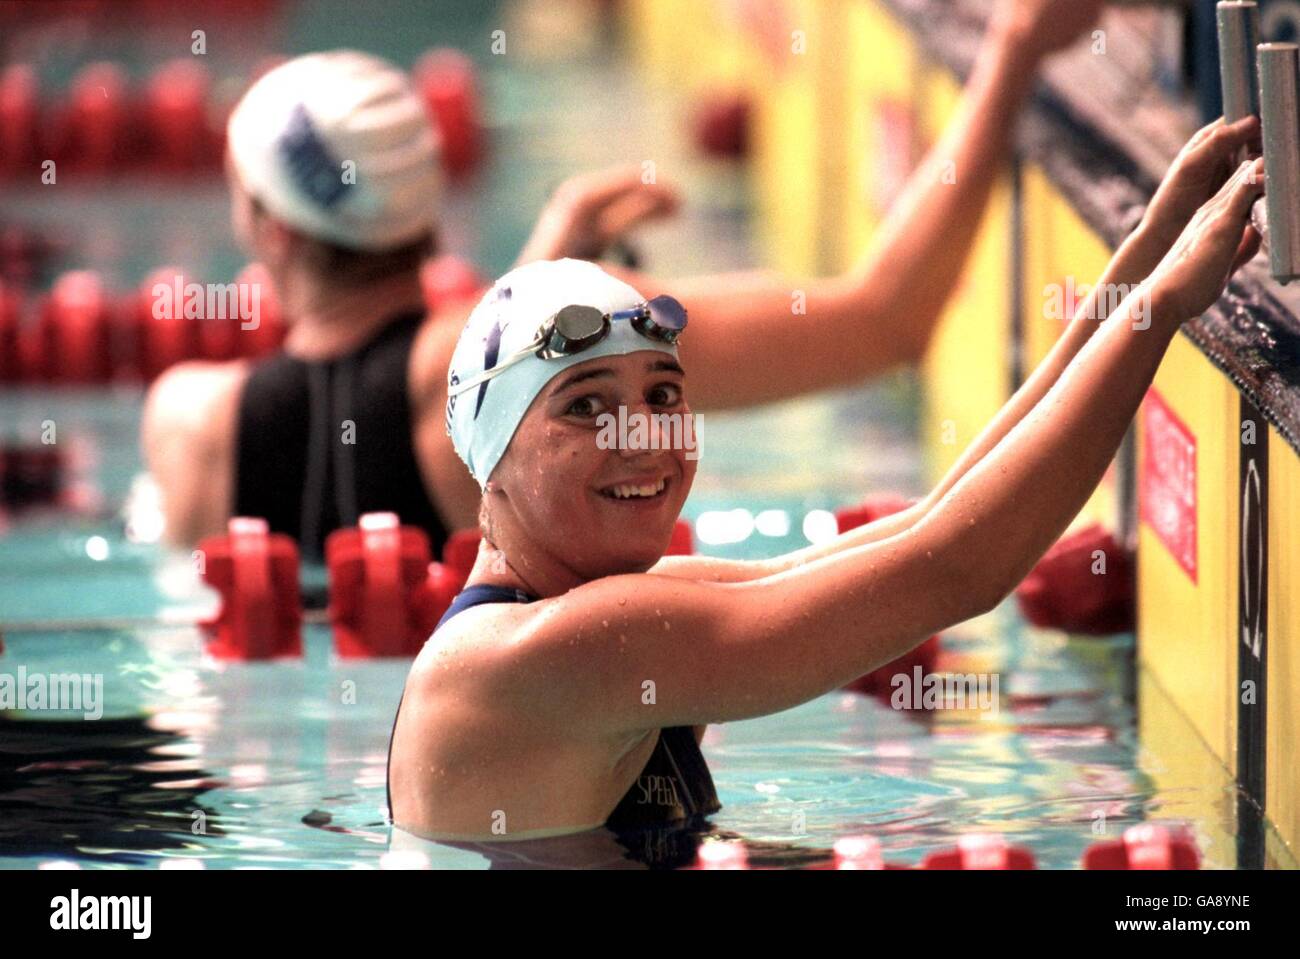 Swimming - Olympic National Swimming Trials - Ponds Forge. Karen Legg Stock Photo